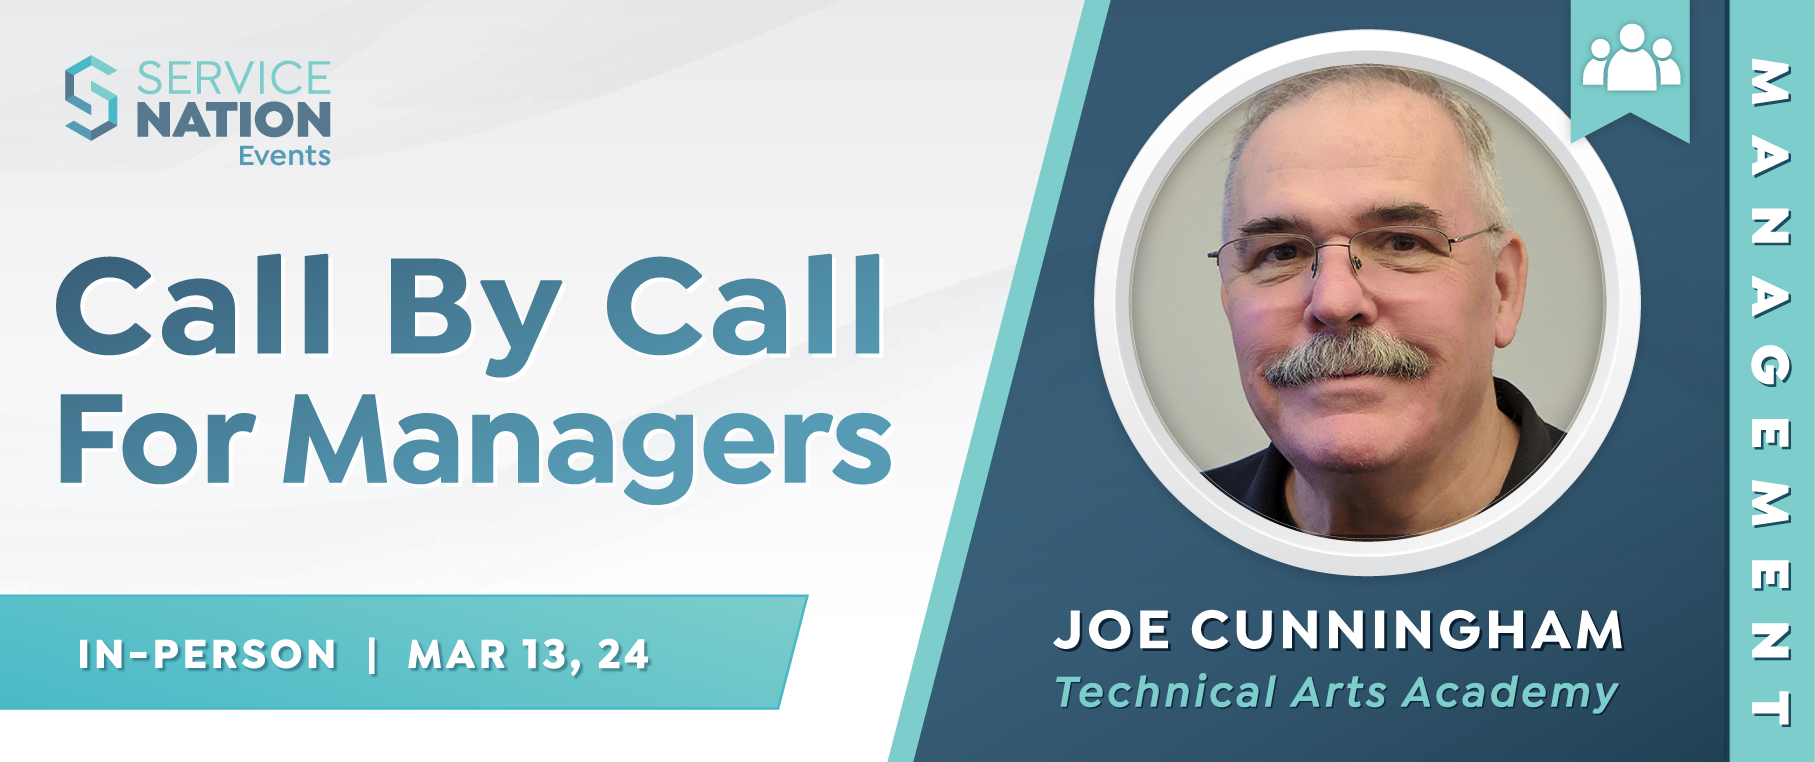 Call by Call For Managers_Mar 13_Reg